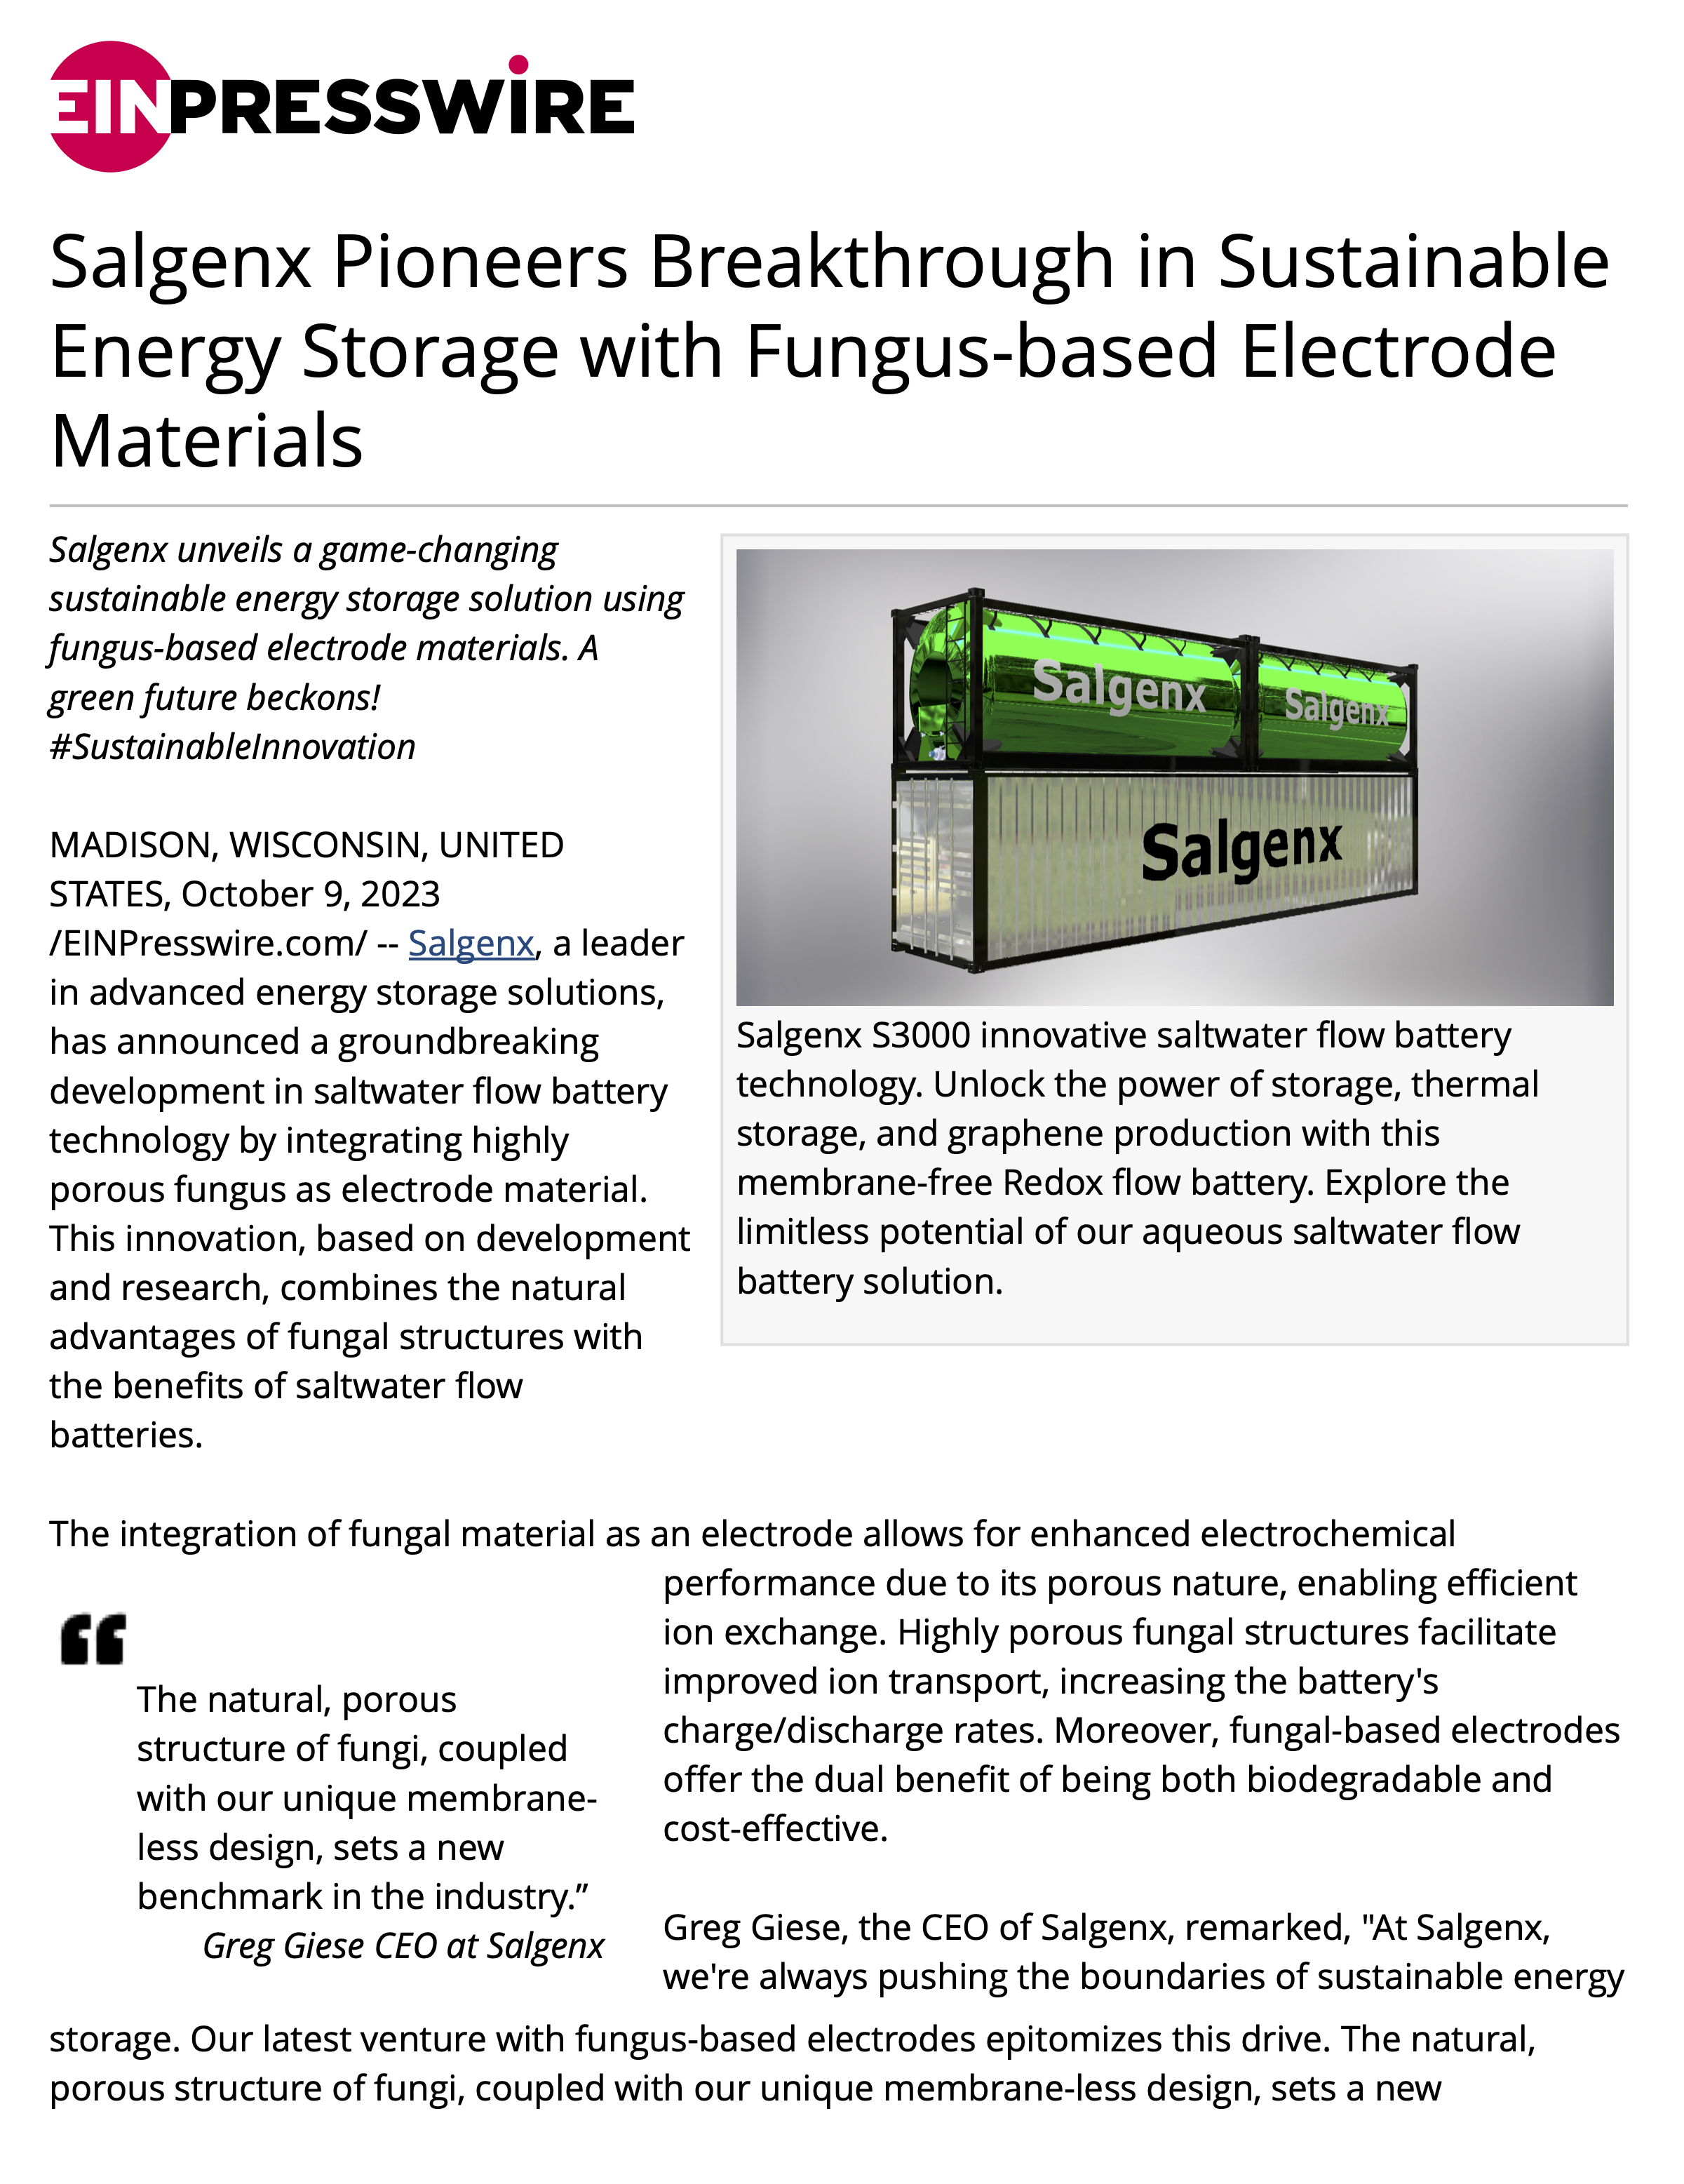 Salgenx Pioneers Breakthrough in Sustainable Energy Storage with Fungus-based Electrode Materials